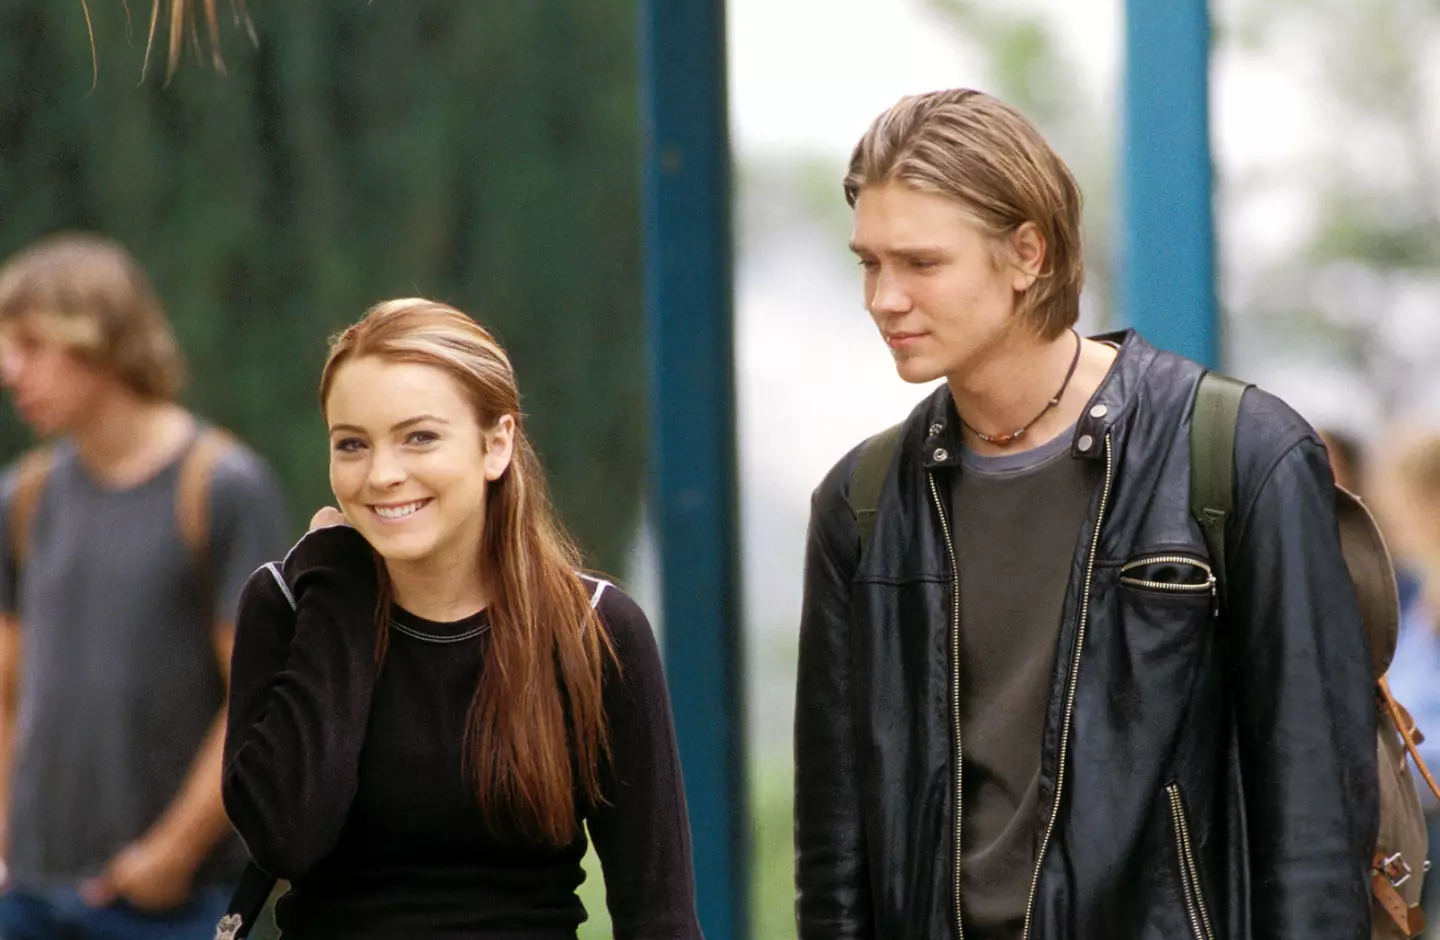 Lohan has said she got 'excited' about the idea of a sequel.